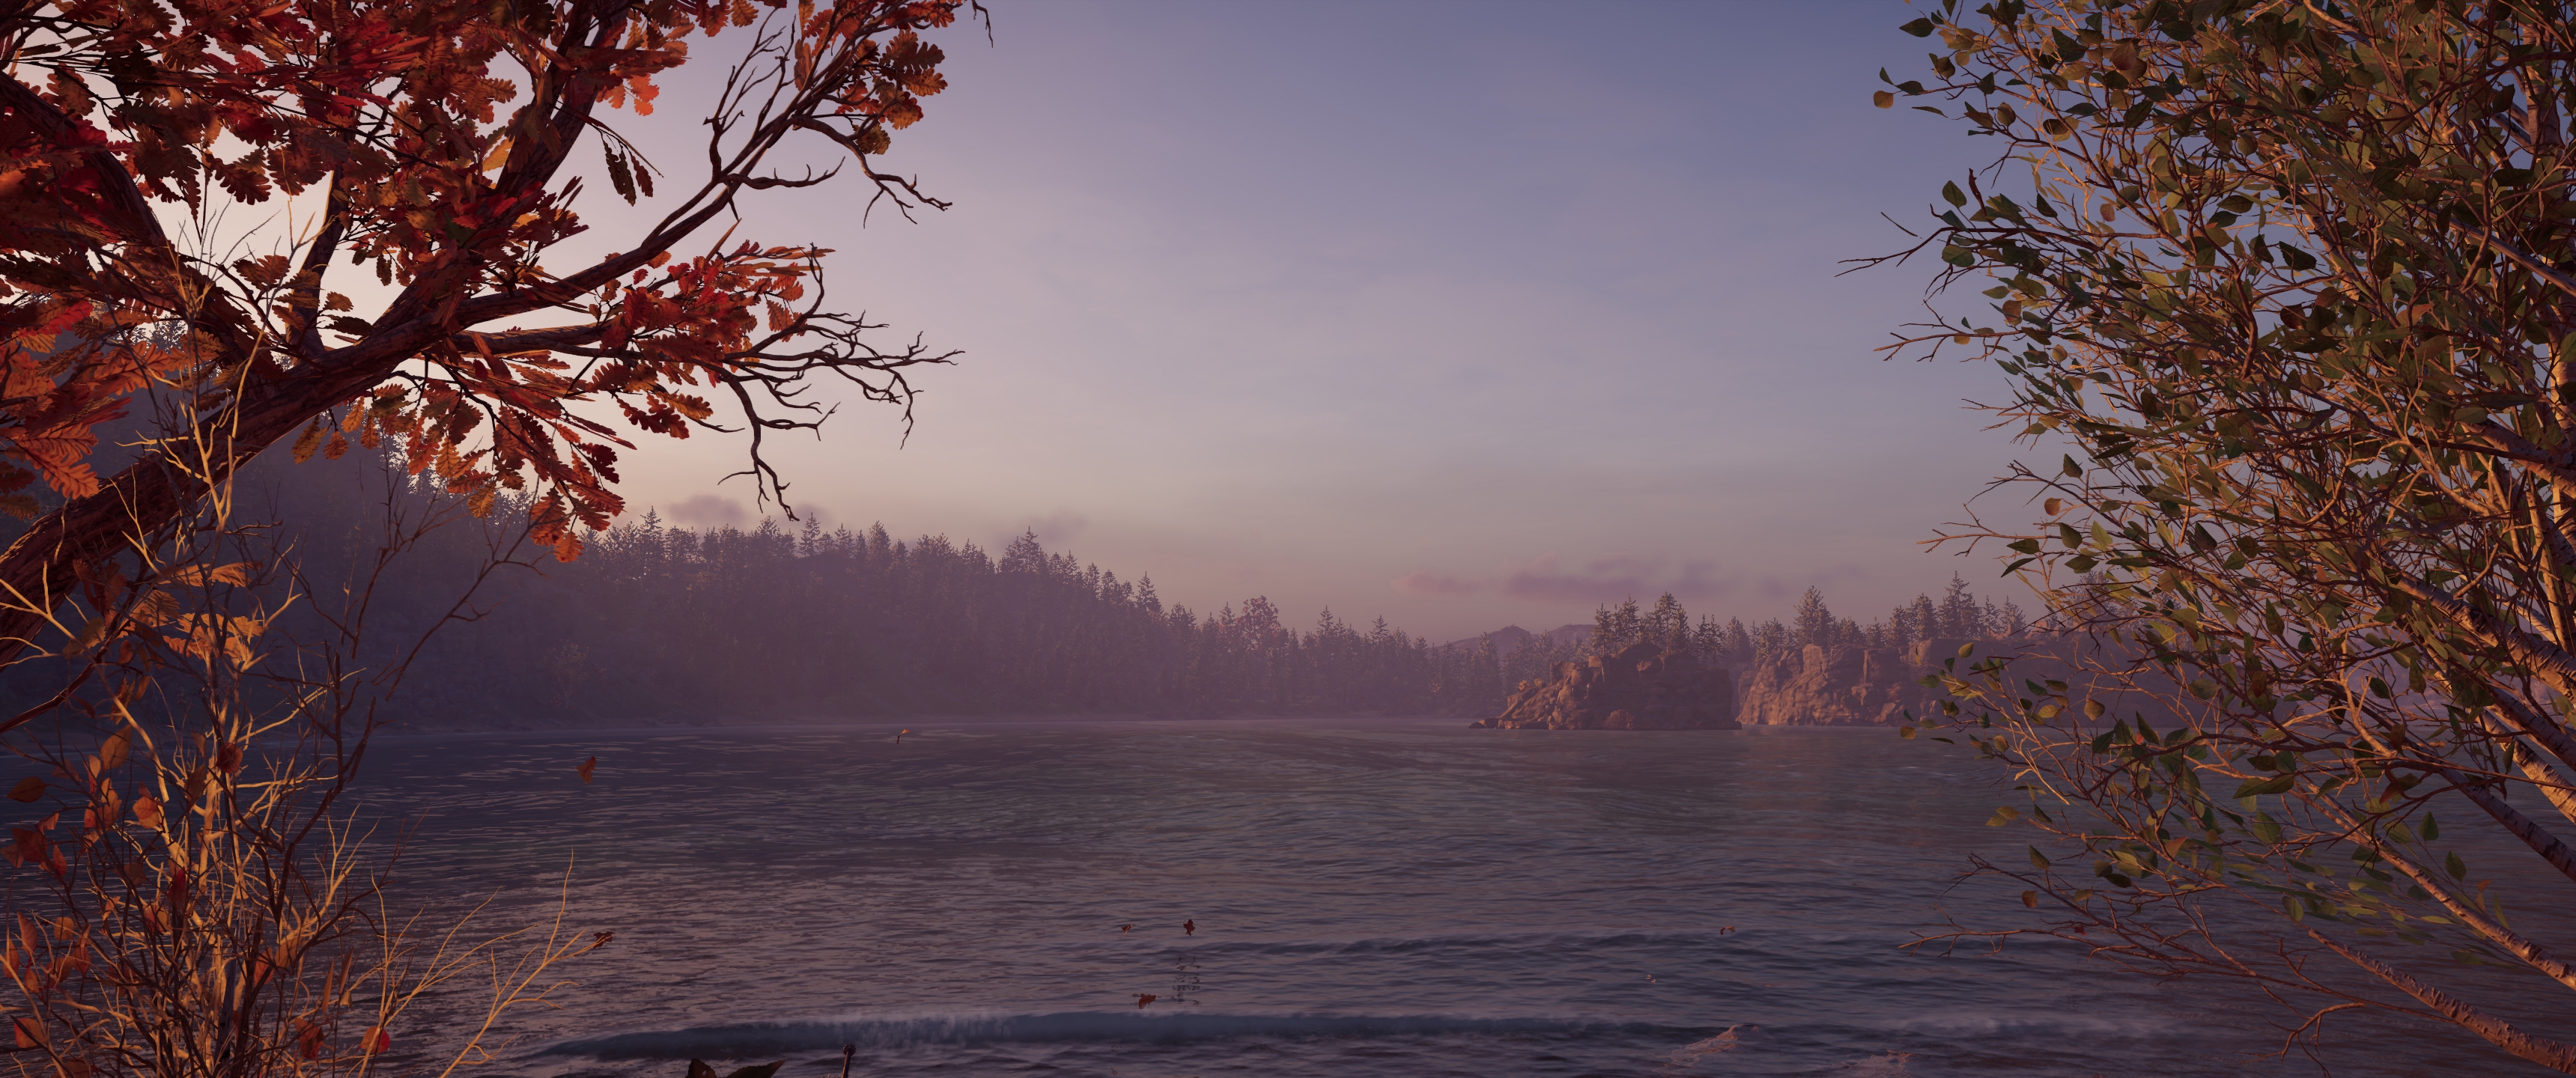 General 3440x1440 Assassins Creed: Odyssey Greece video games Assassin's Creed Ubisoft video game art screen shot water trees sky leaves lake CGI